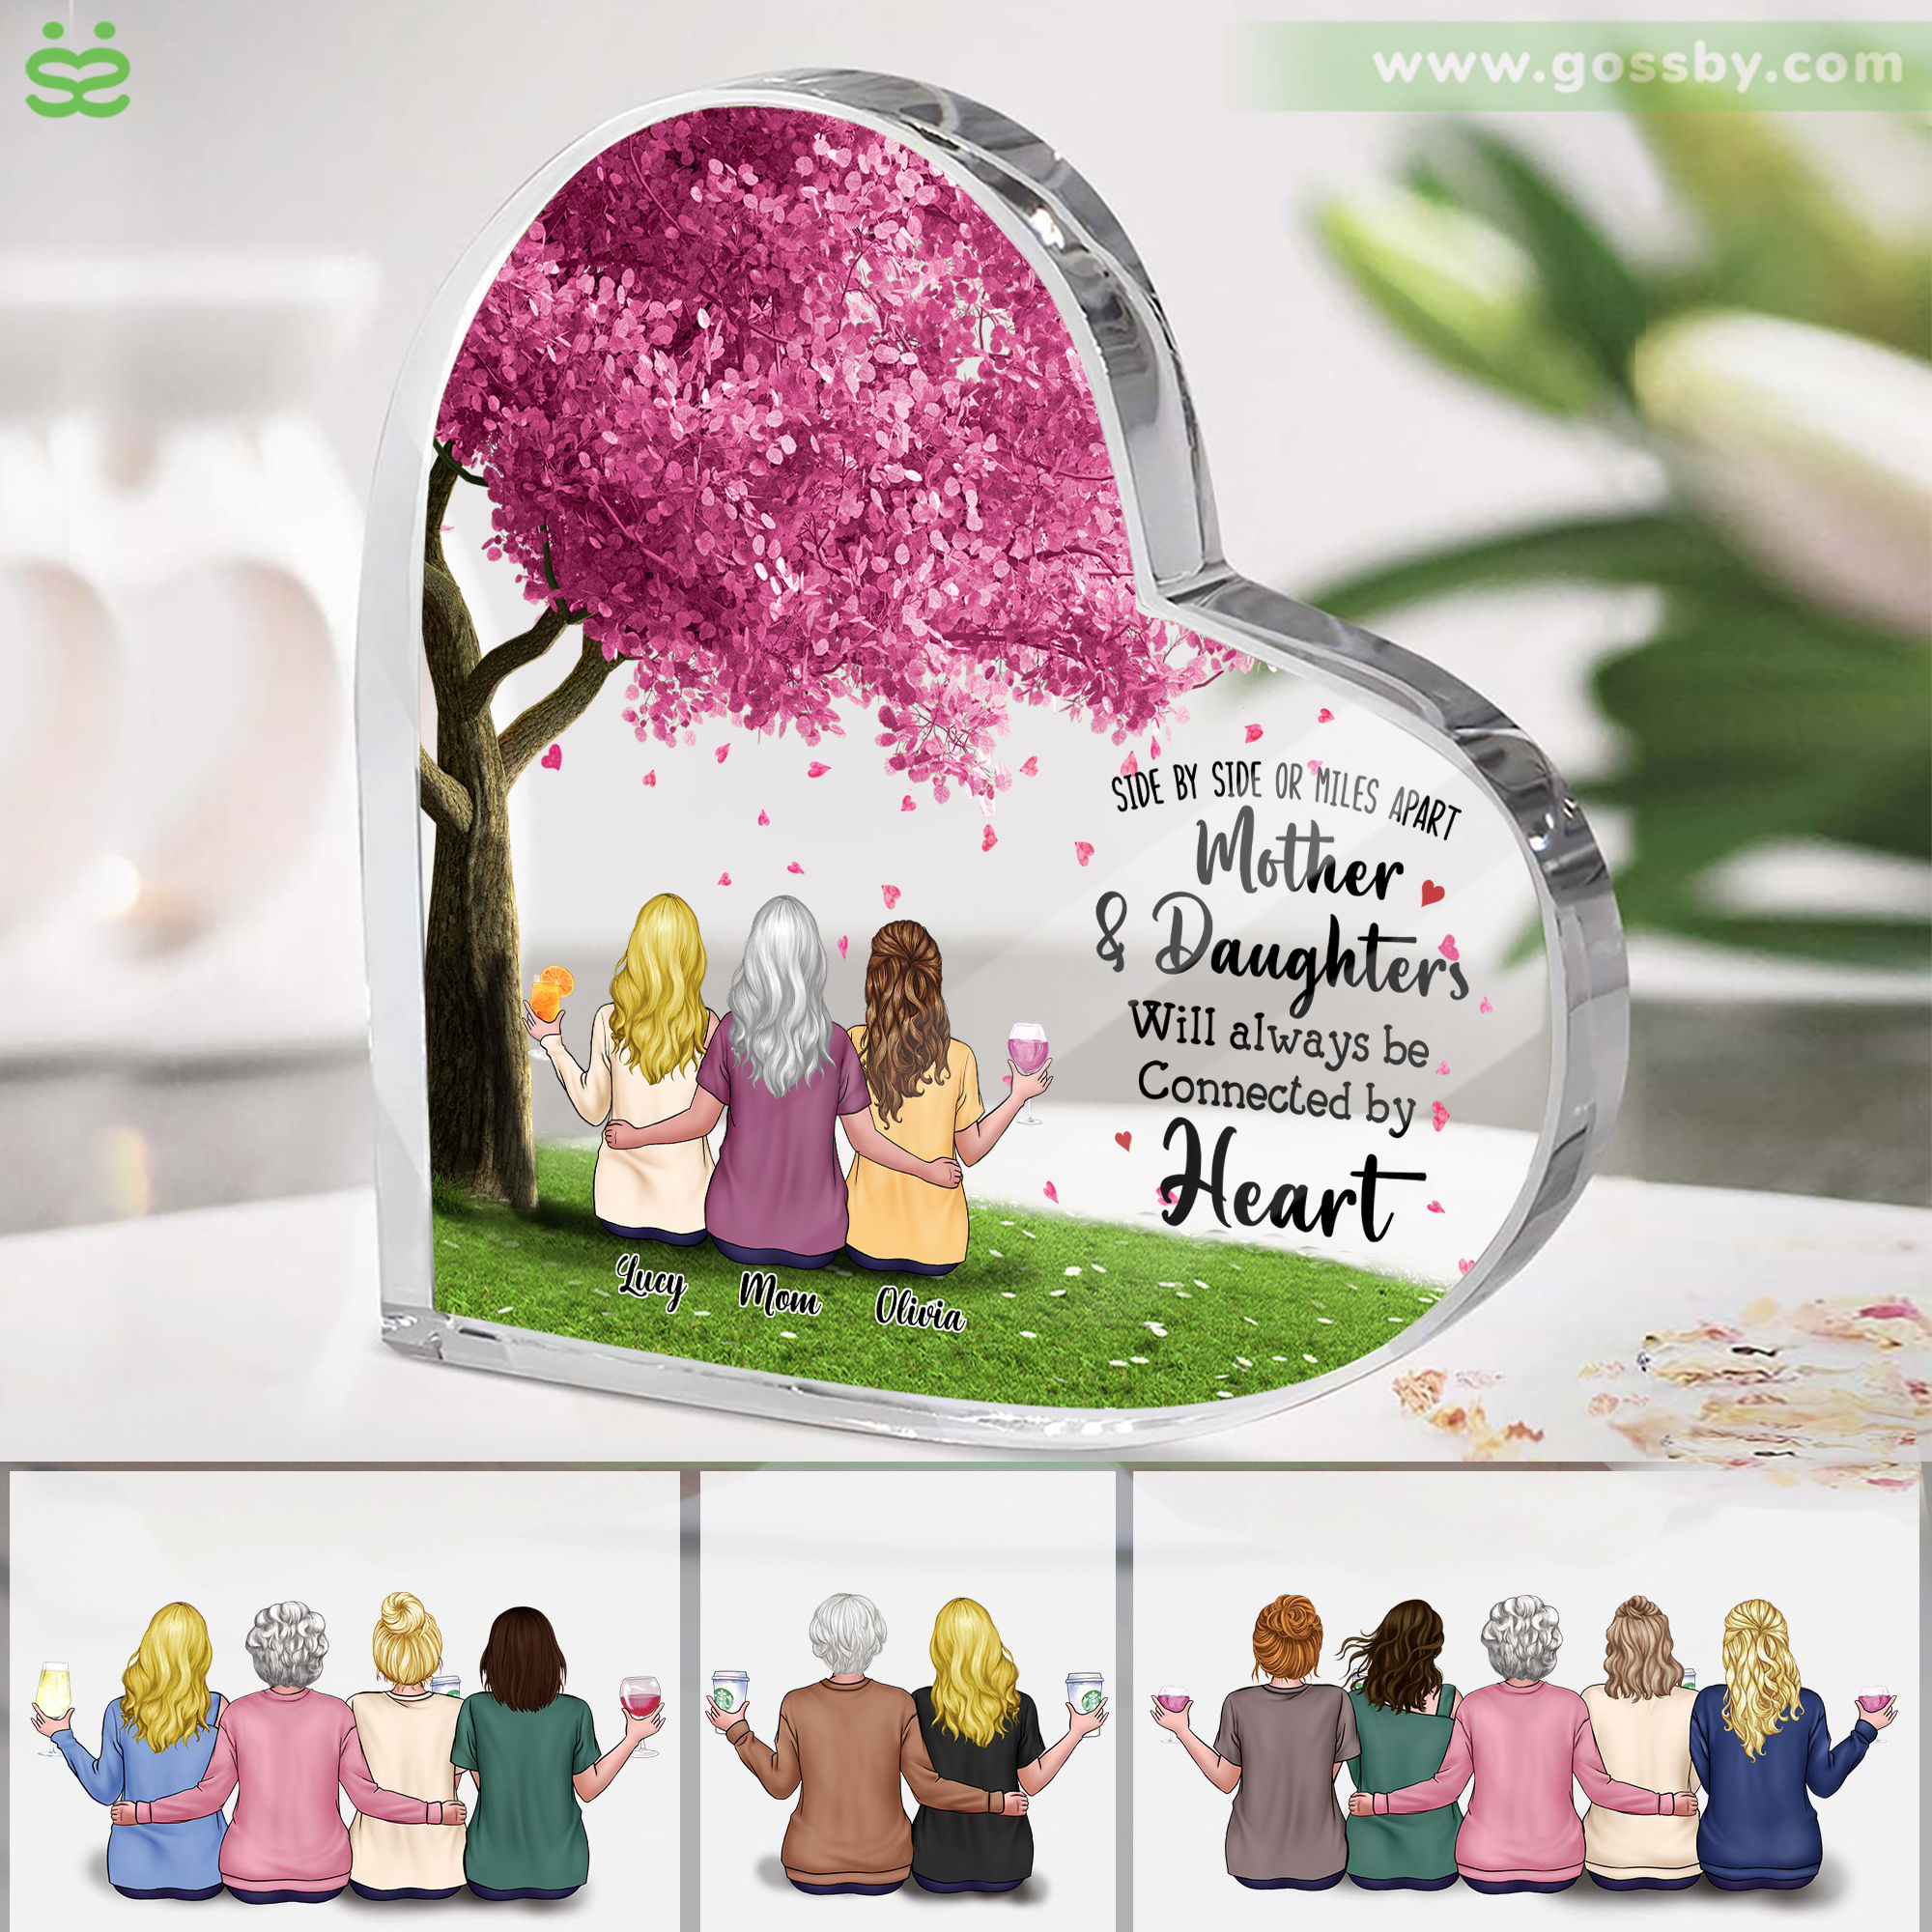 Mother and Daughters - Side by side or miles apart Mother and Daughters will always be connected by heart (Custom Heart-Shaped Acrylic Plaque)